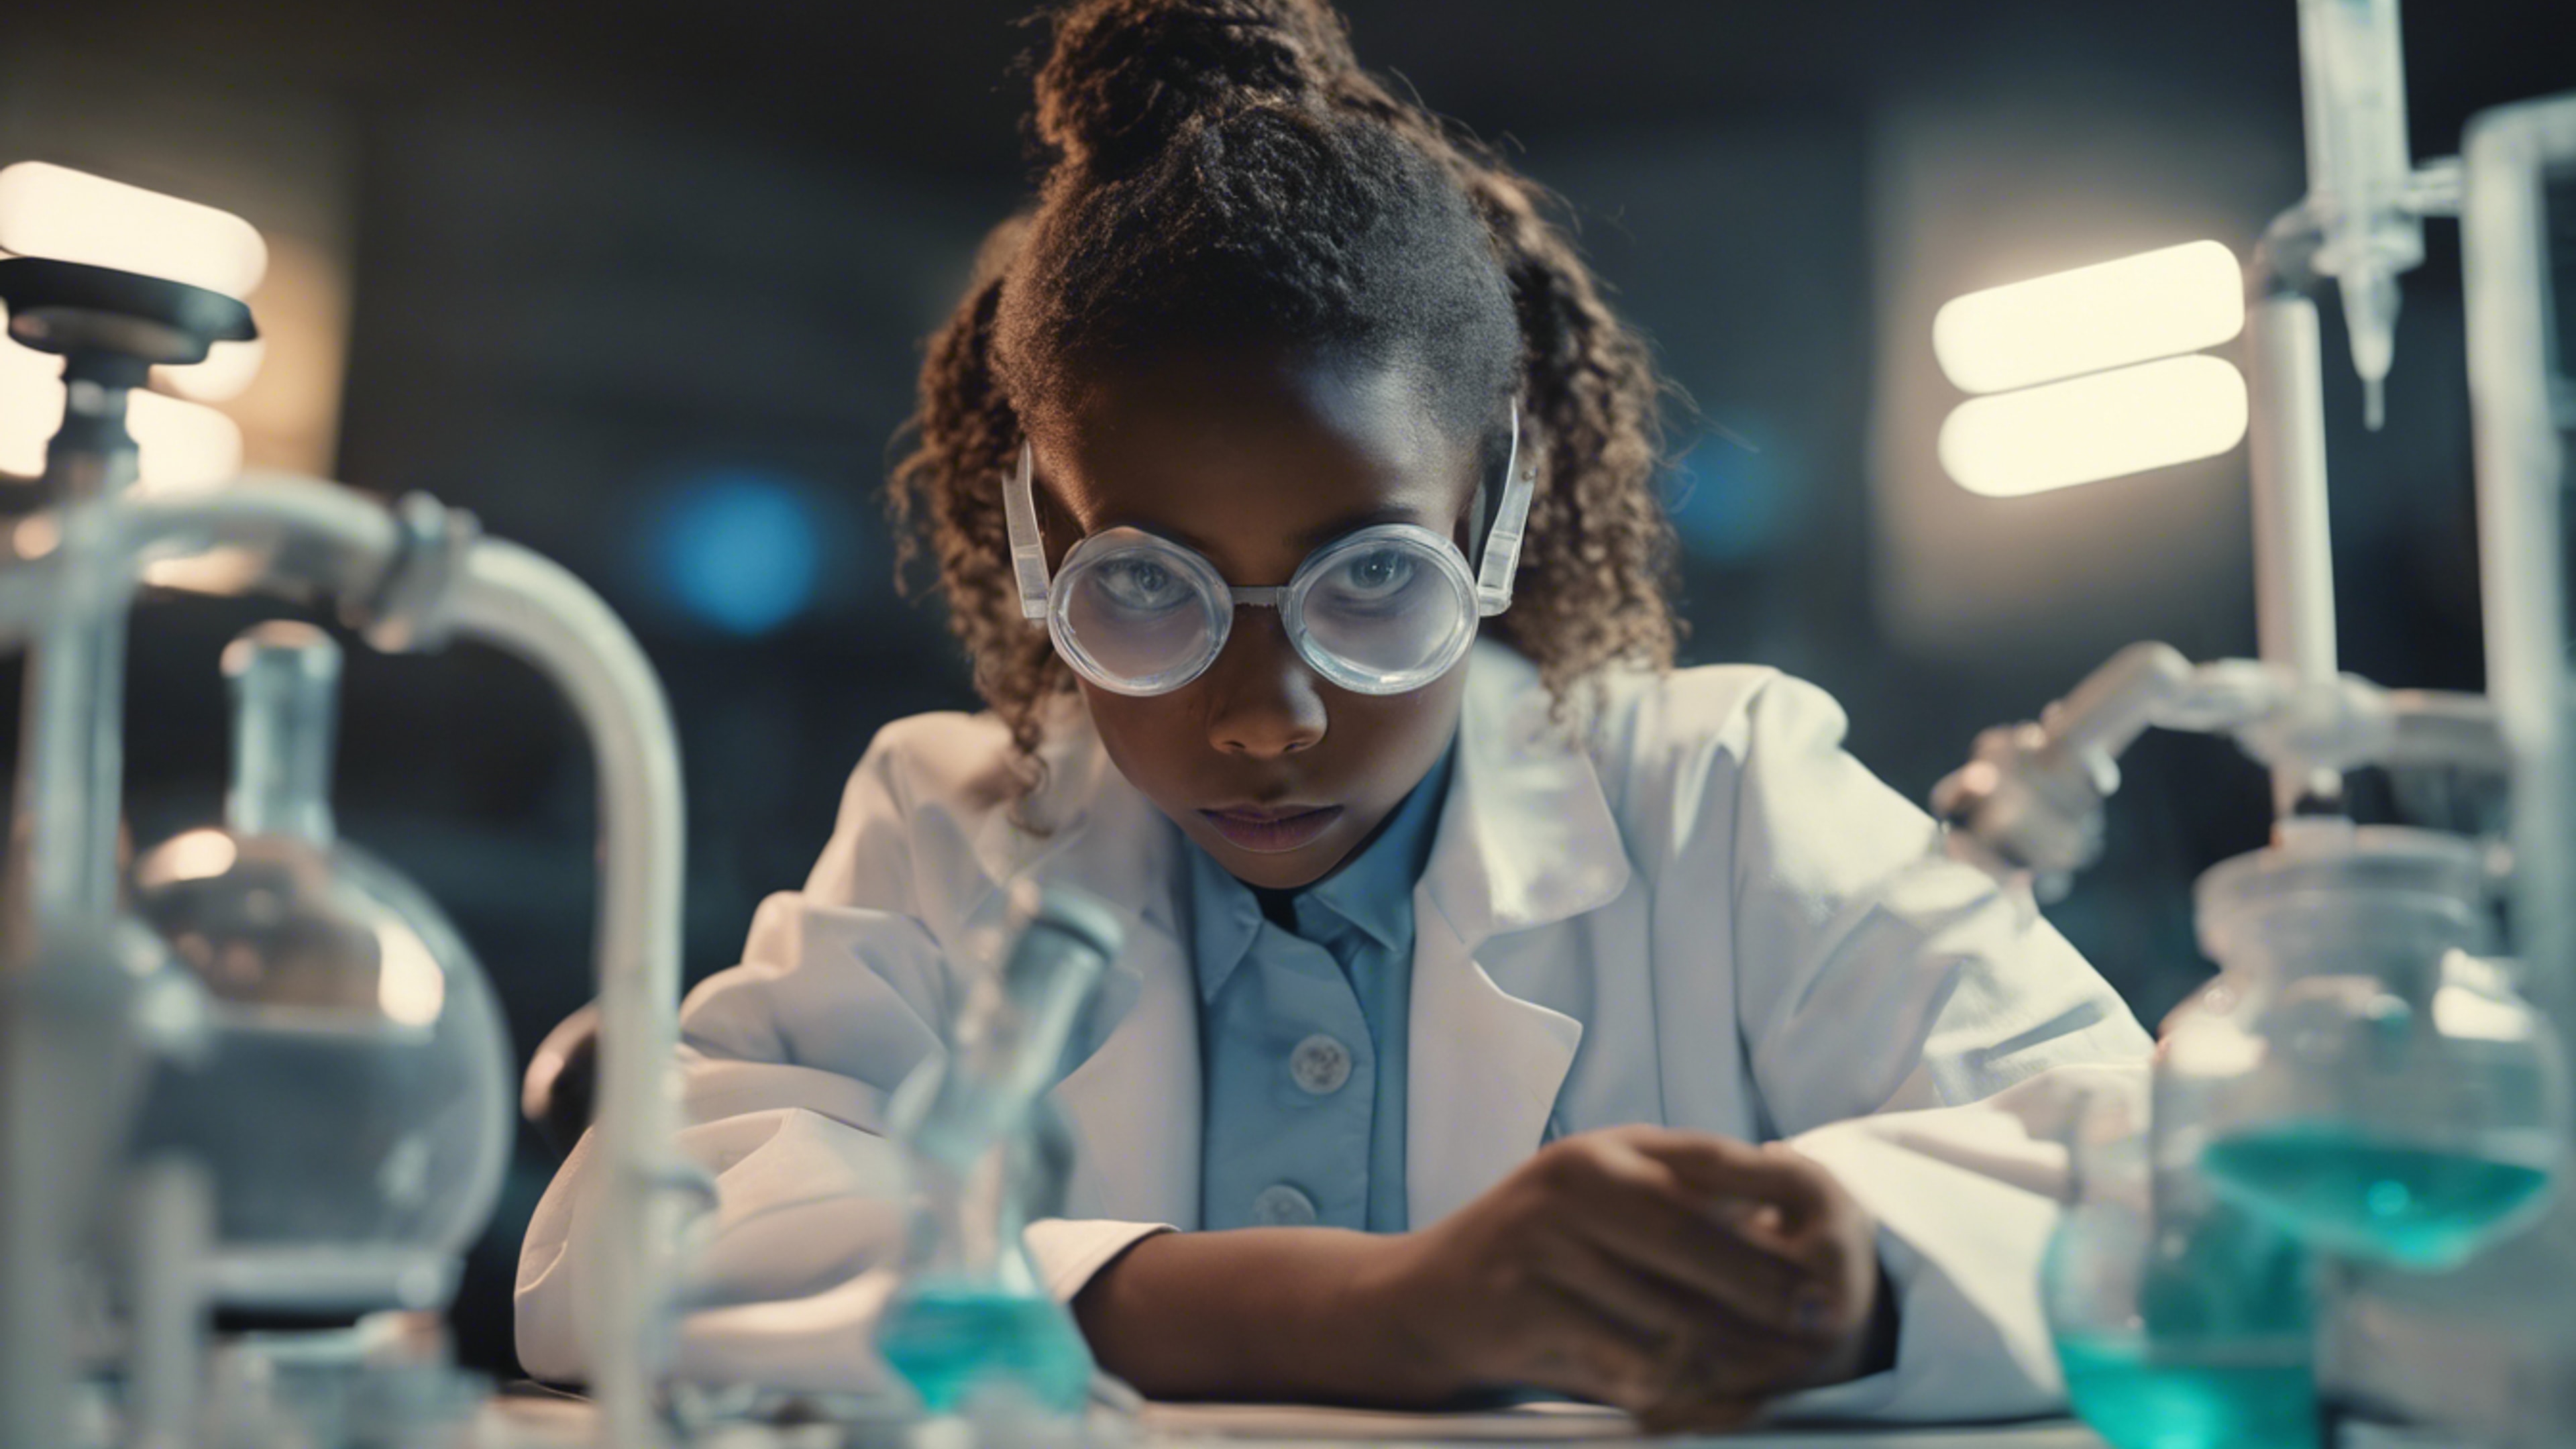 A young black girl wearing goggles and lab coat immersed in doing science experiment. Тапет[448c919503a247f79693]